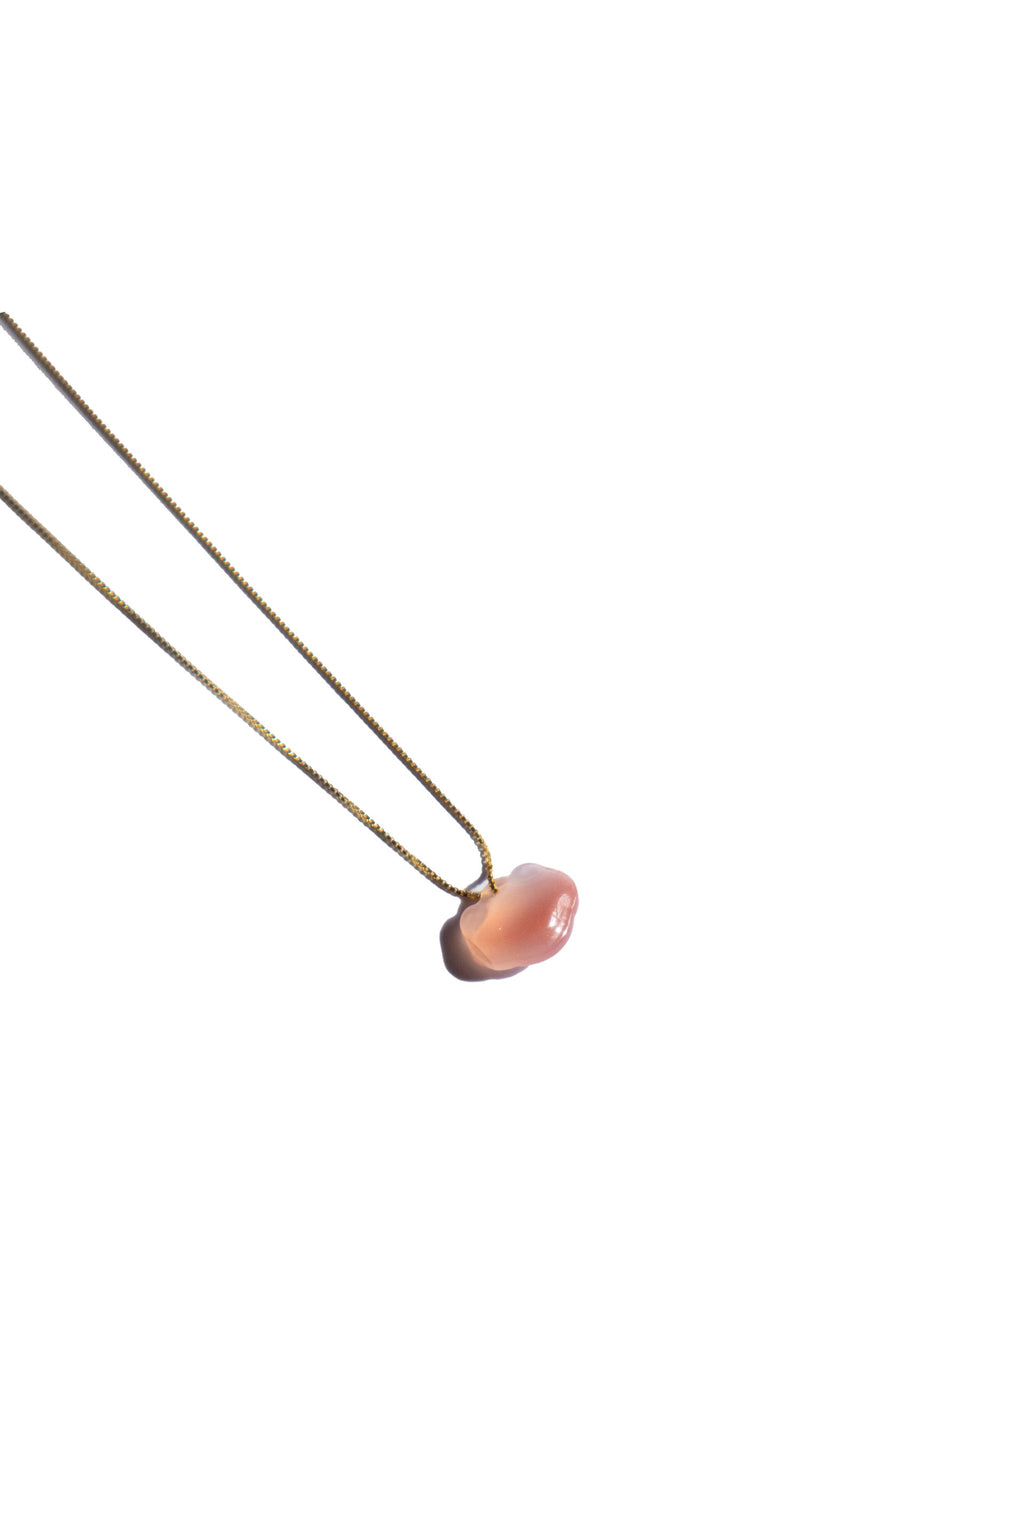 seree-pink-cloud-agate-pendant-gold-plated-box-chain-necklace-1